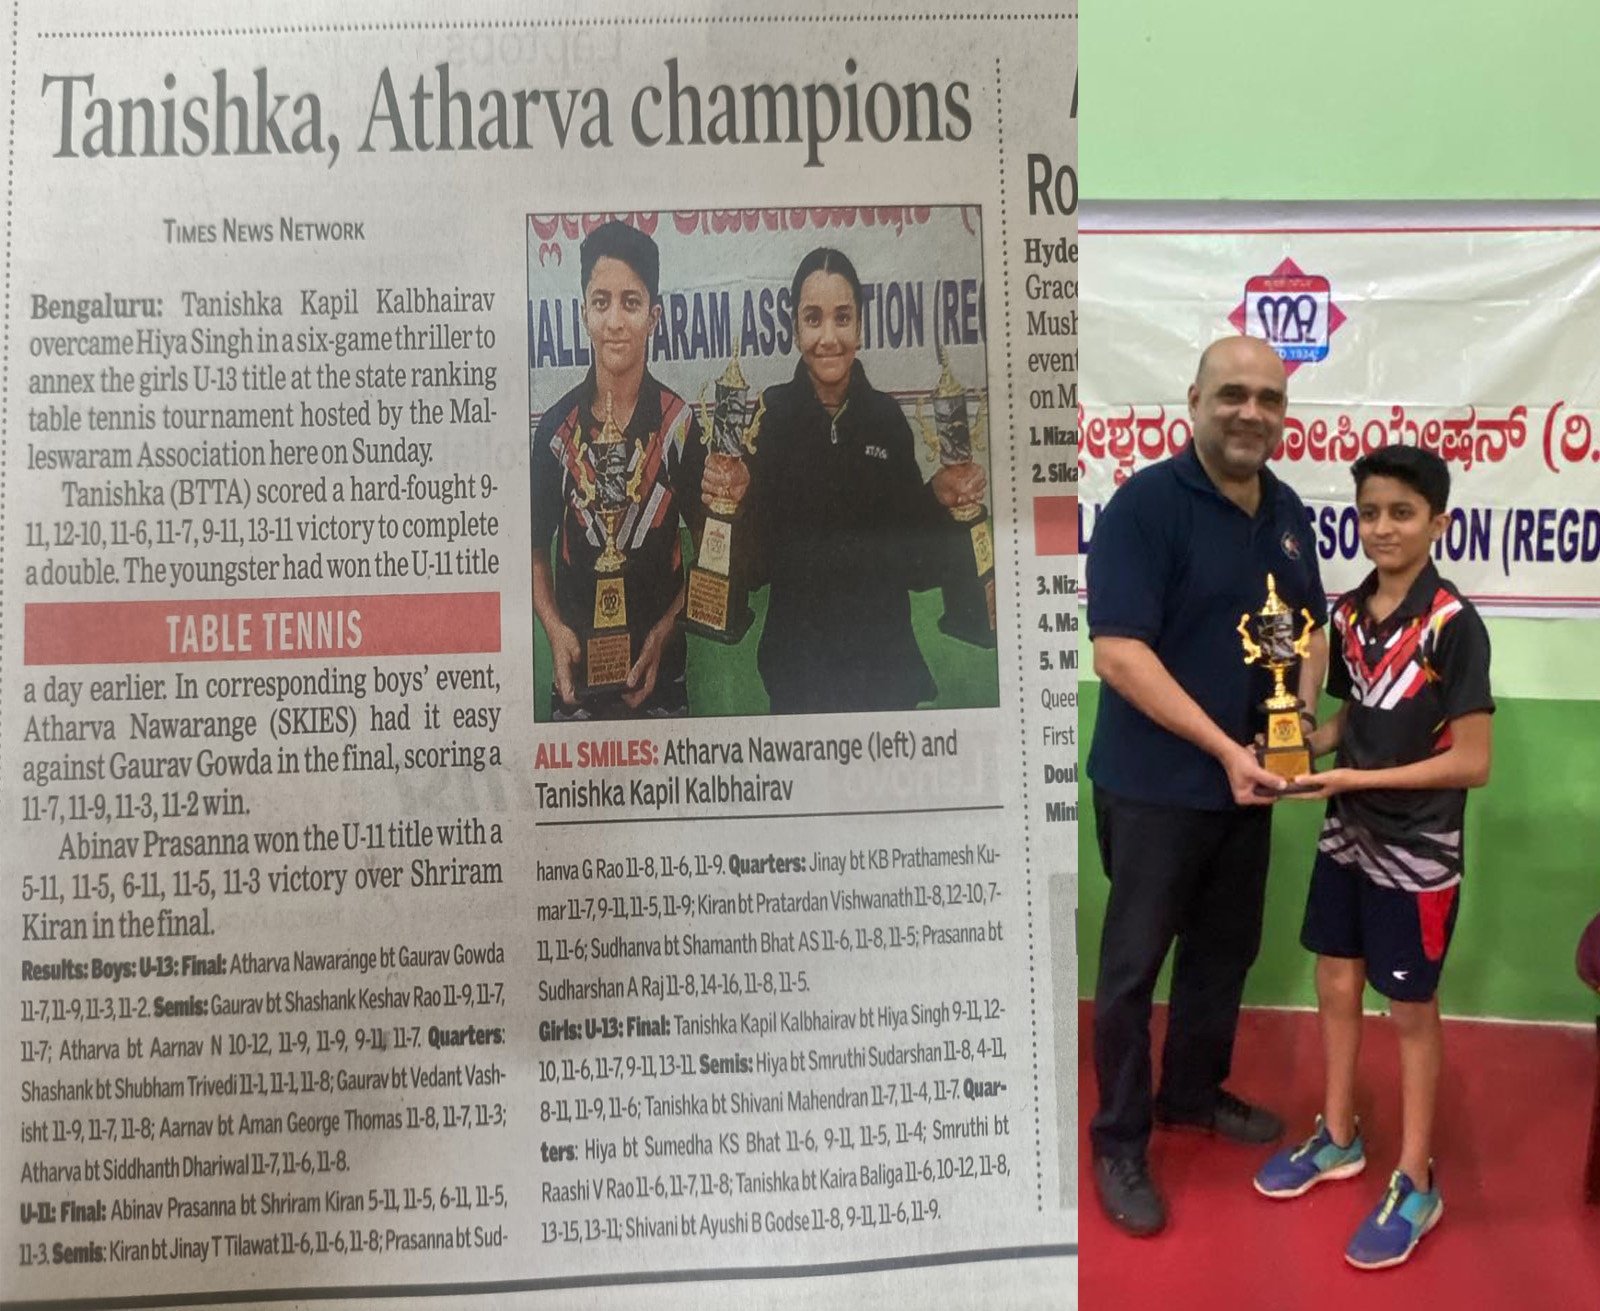 <strong>Atharva Nawarange</strong> of grade 7 participated in the <strong>U-13 State Ranking Table Tennis Tournament</strong> hosted by the Malleshwaram Association on Sunday, 9th October 2022. He won the <strong>first prize</strong> by defeating Gaurav Gowda.